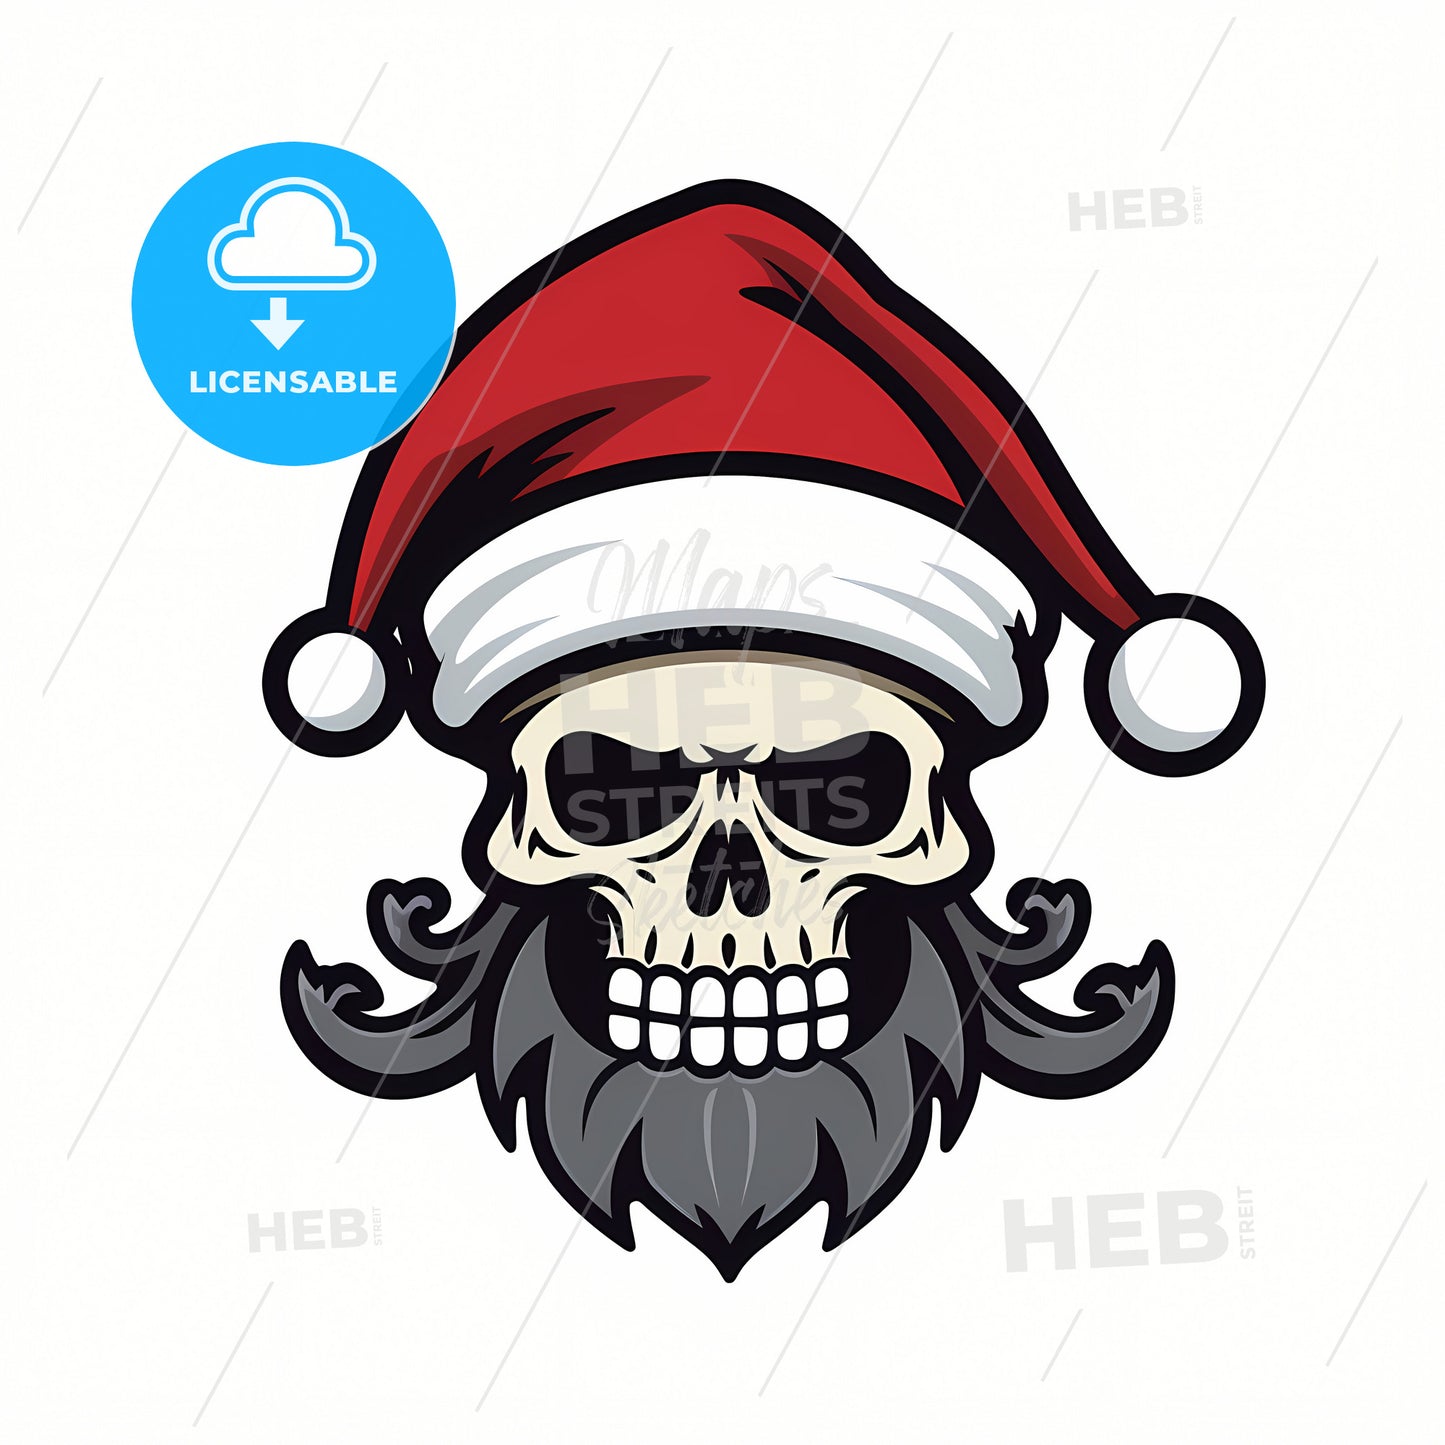 A Pirate Skeleton With Christmas Hat, A Skull With A Beard And Mustache Wearing A Santa Hat